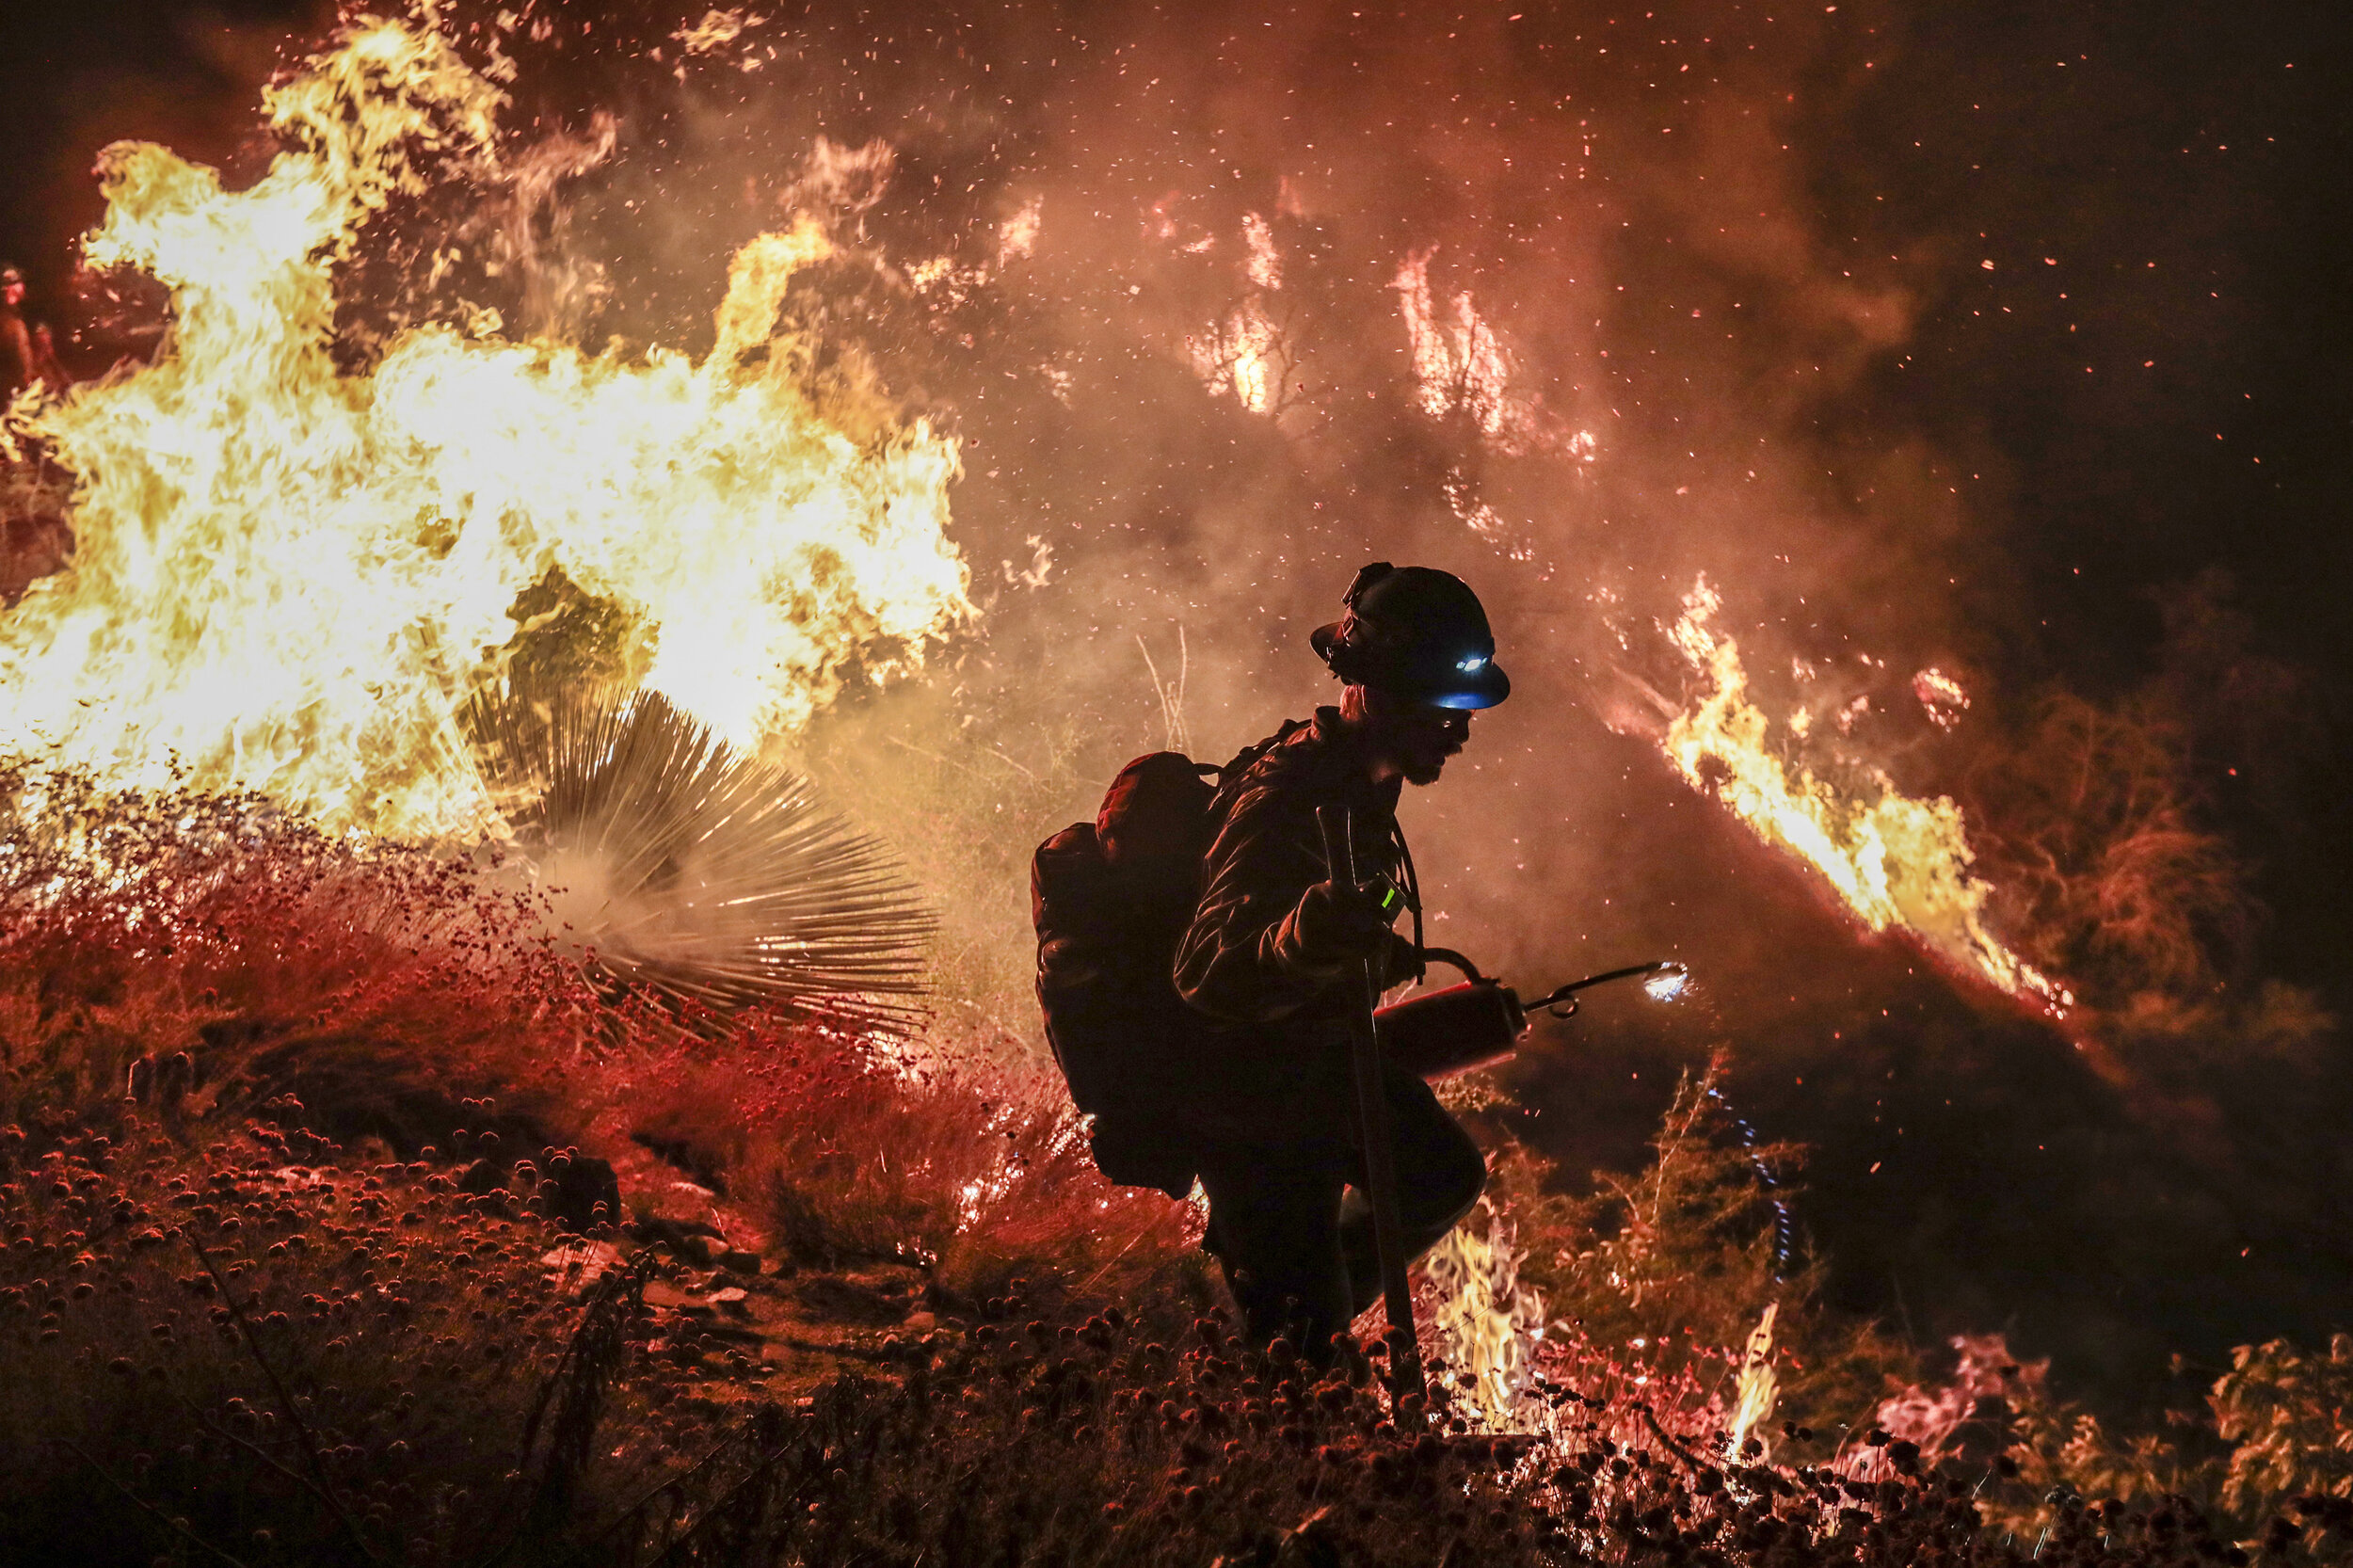  Firefighter Sam Wycoff ignites dry brush as members of the Blue Ridge, Arizona hot shot crew execute a burn out operation as the Bobcat Fire progresses closer to Mt. Wilson, home of the Mt. Wilson Observatory and numerous communication towers deemed